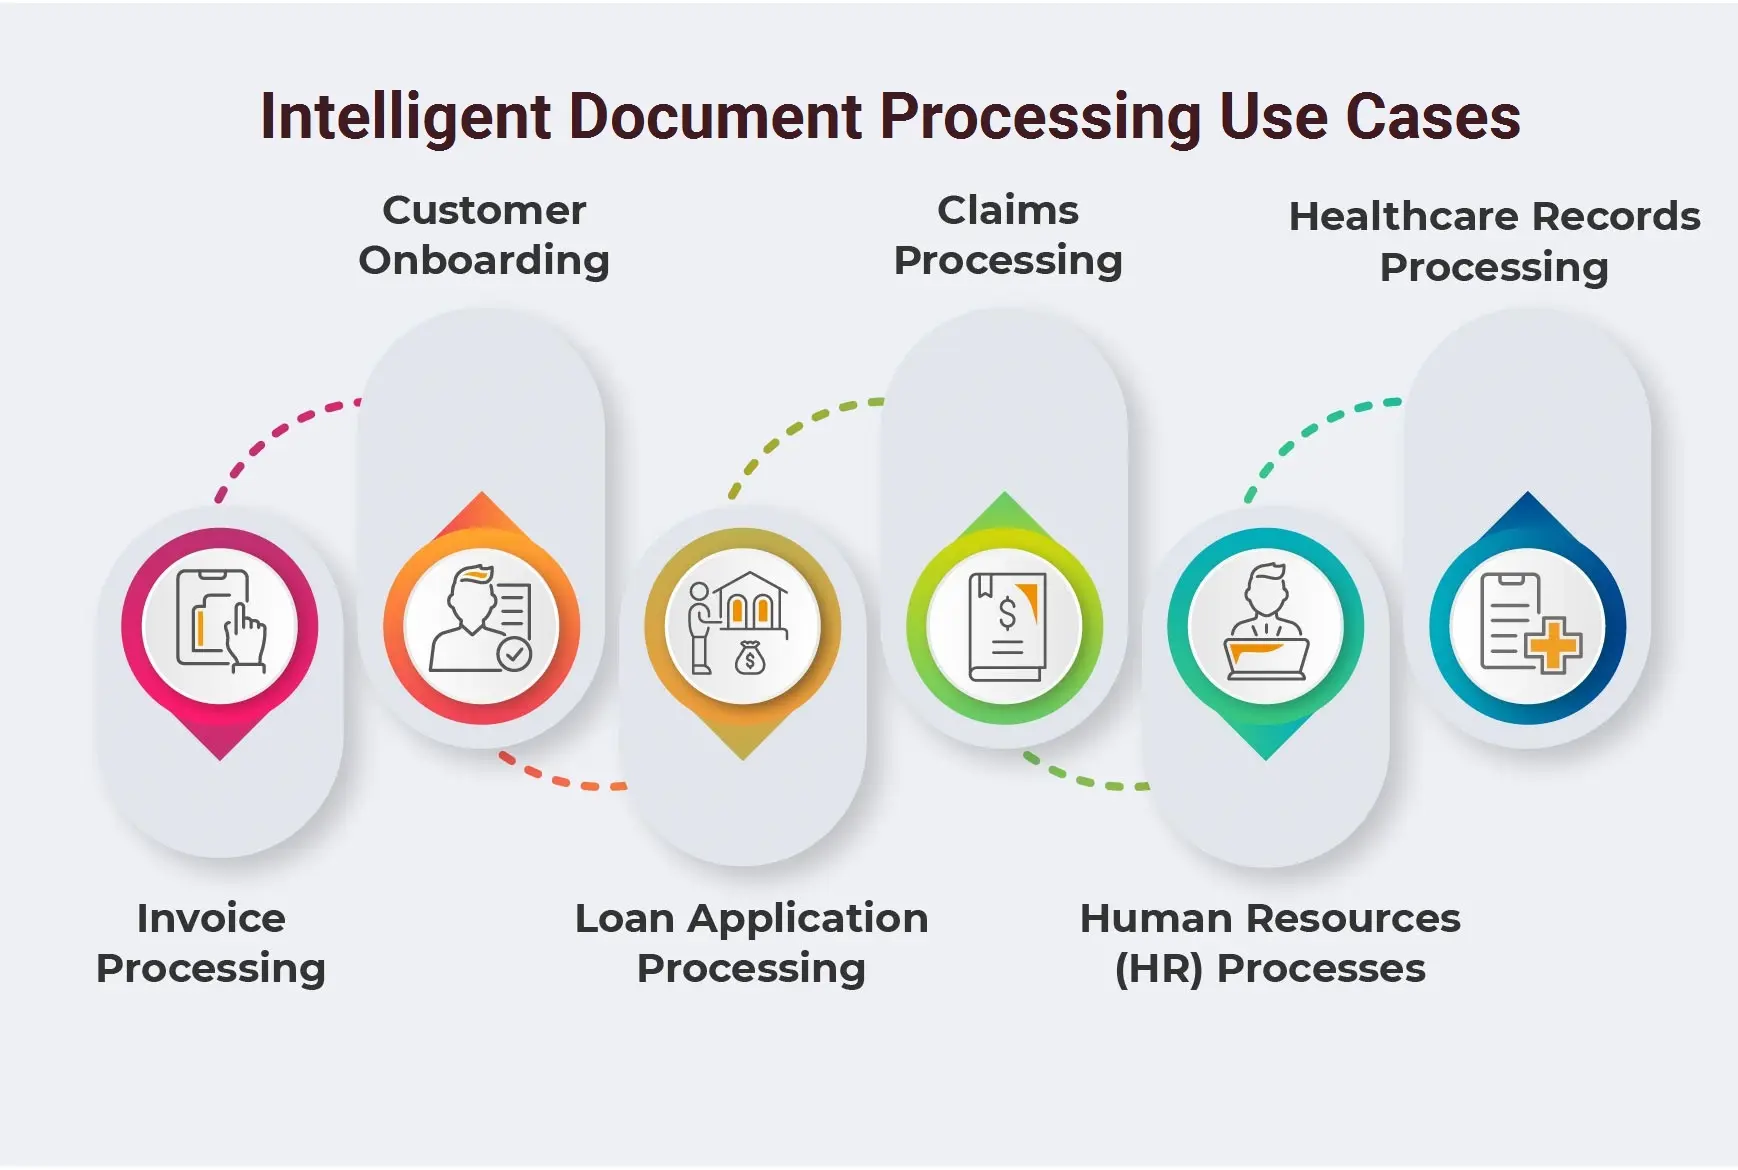 Intelligent Document Processing Use Cases